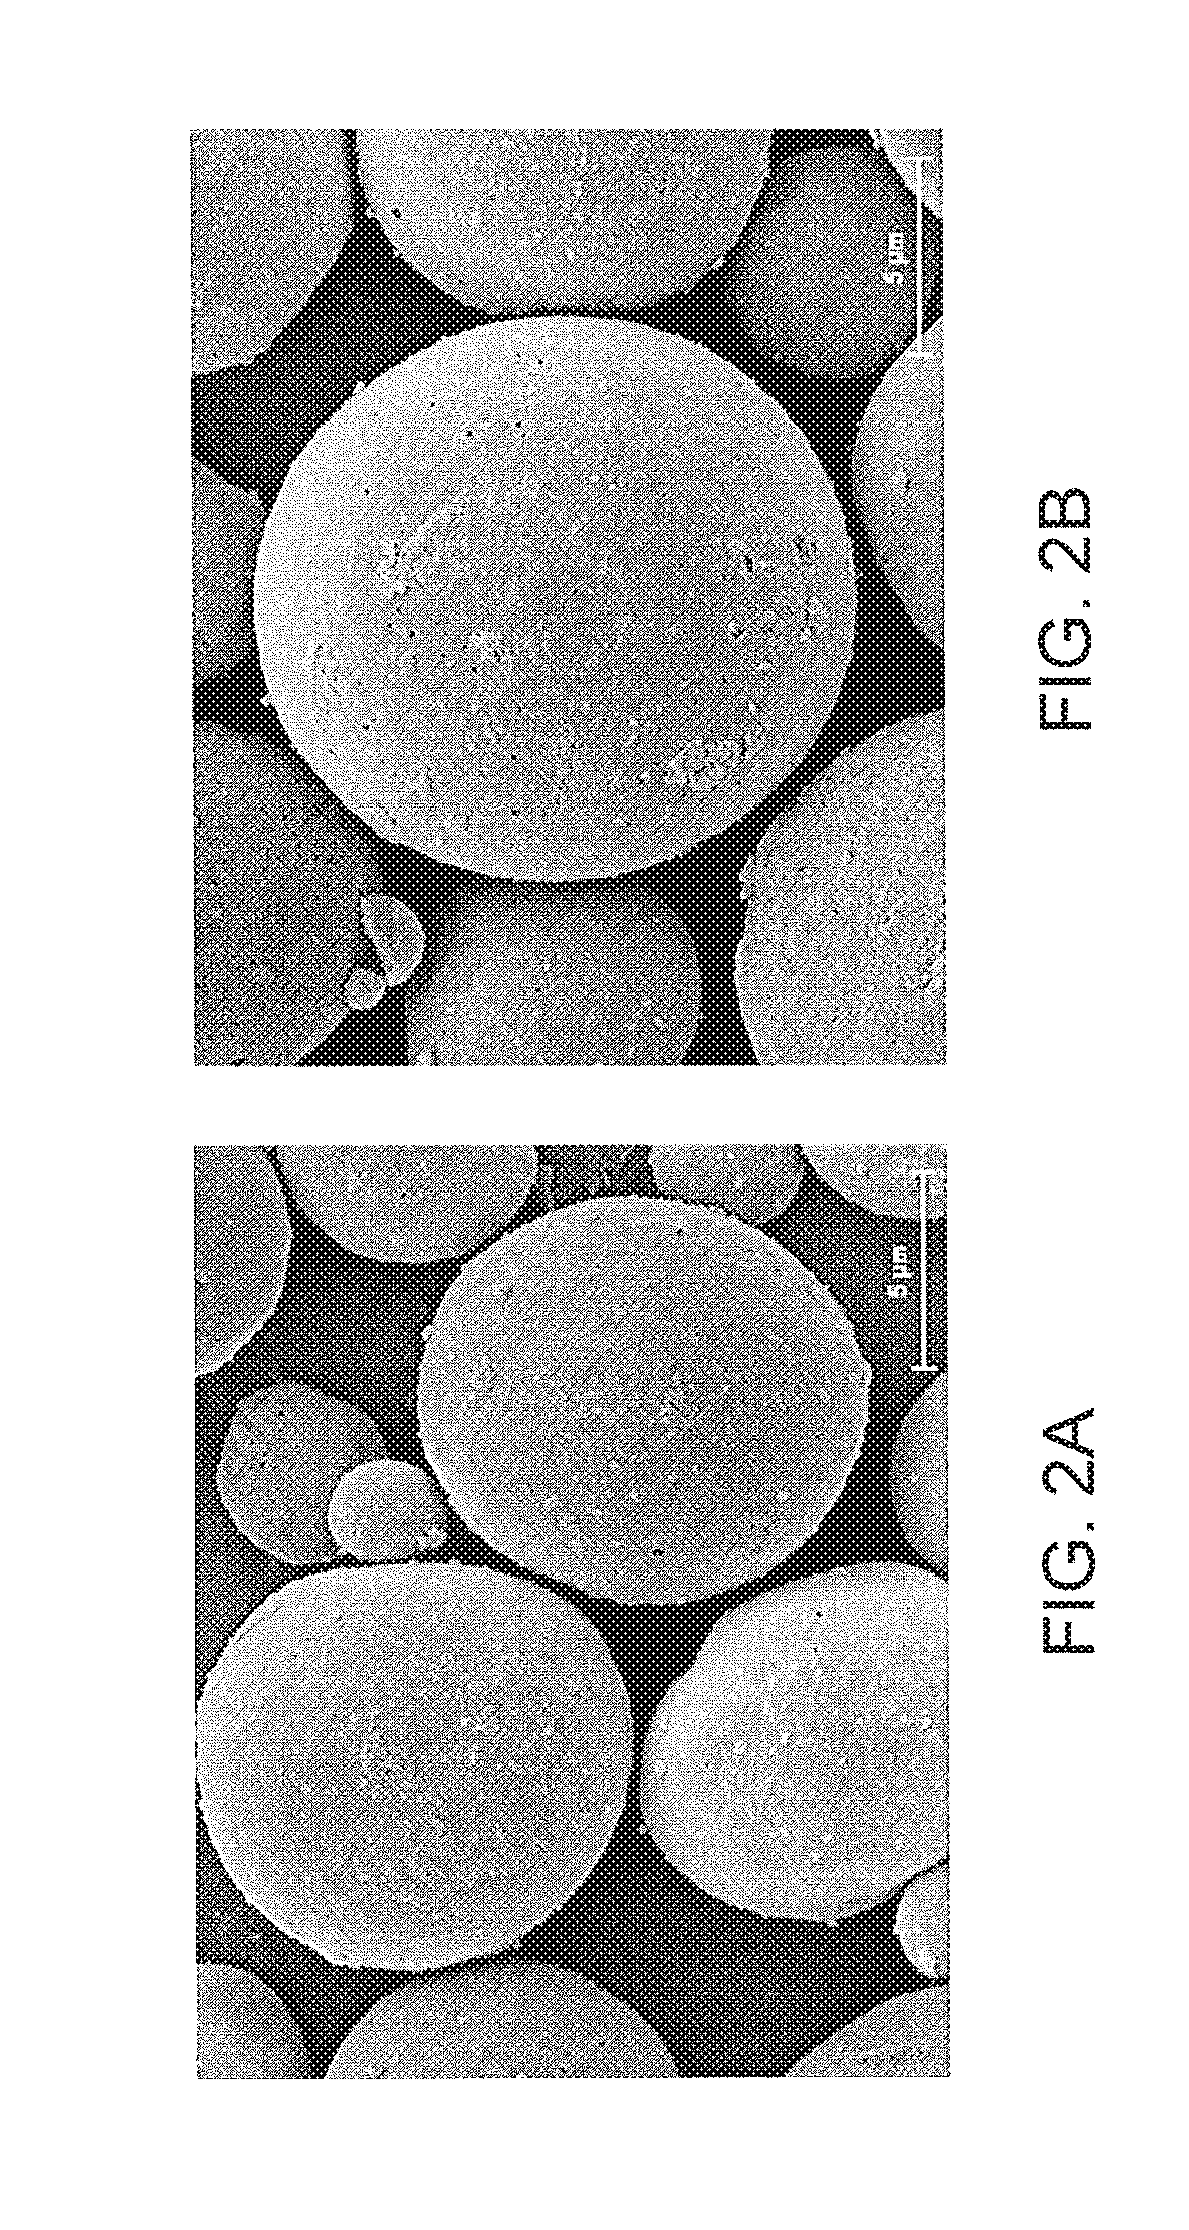 Core/shell catalyst particles and method of manufacture